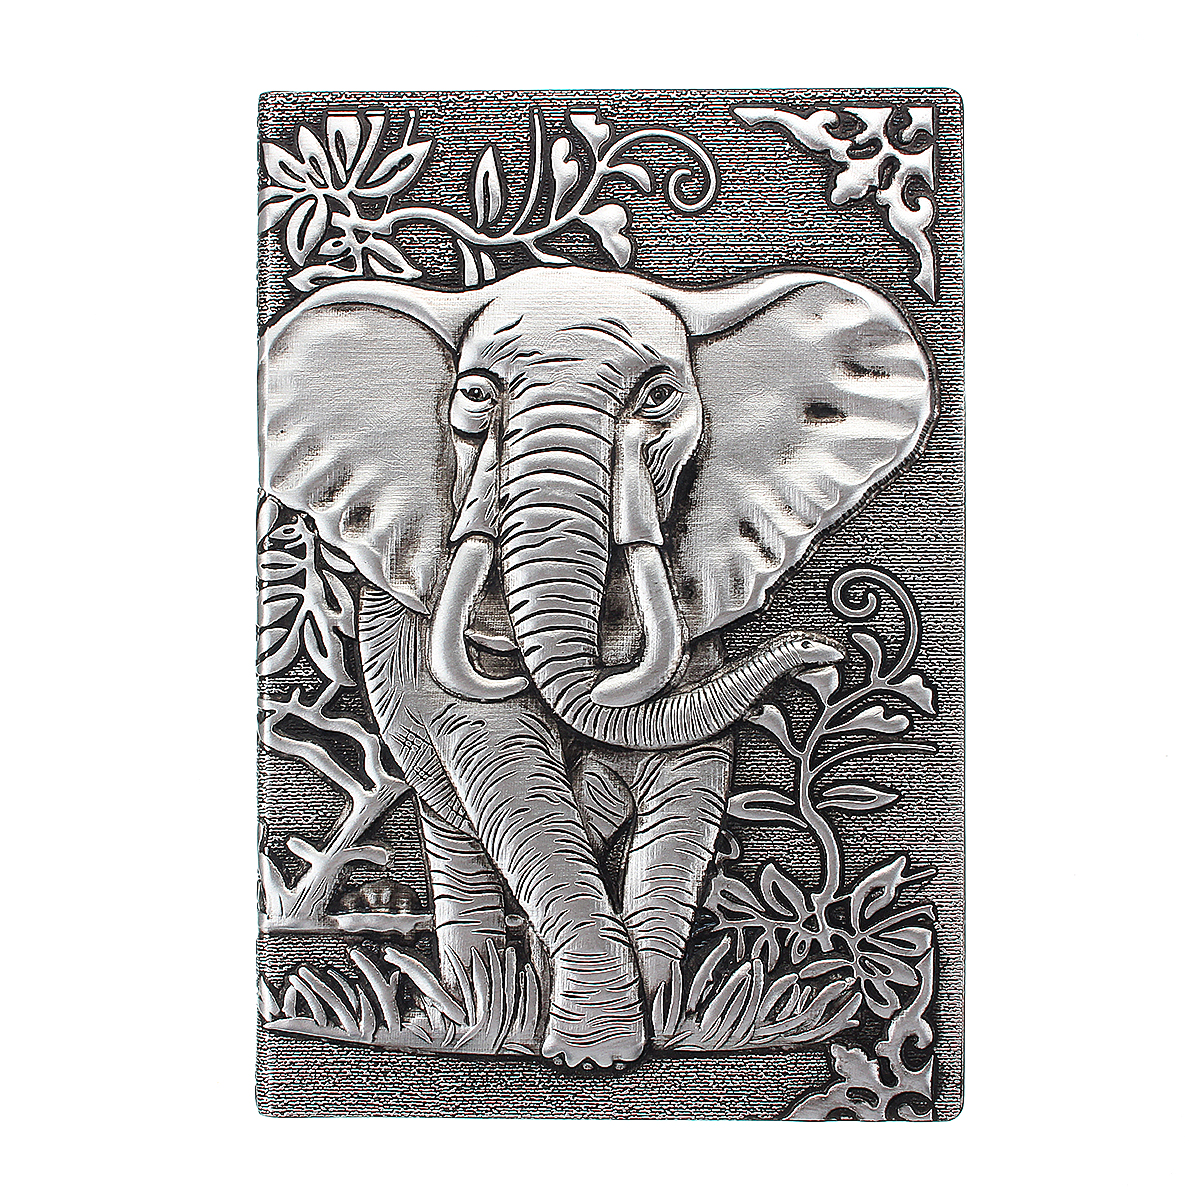 European-elephant-relief-retro-notebook-gift-book-PU-travel-gift-8yue-1631372-2